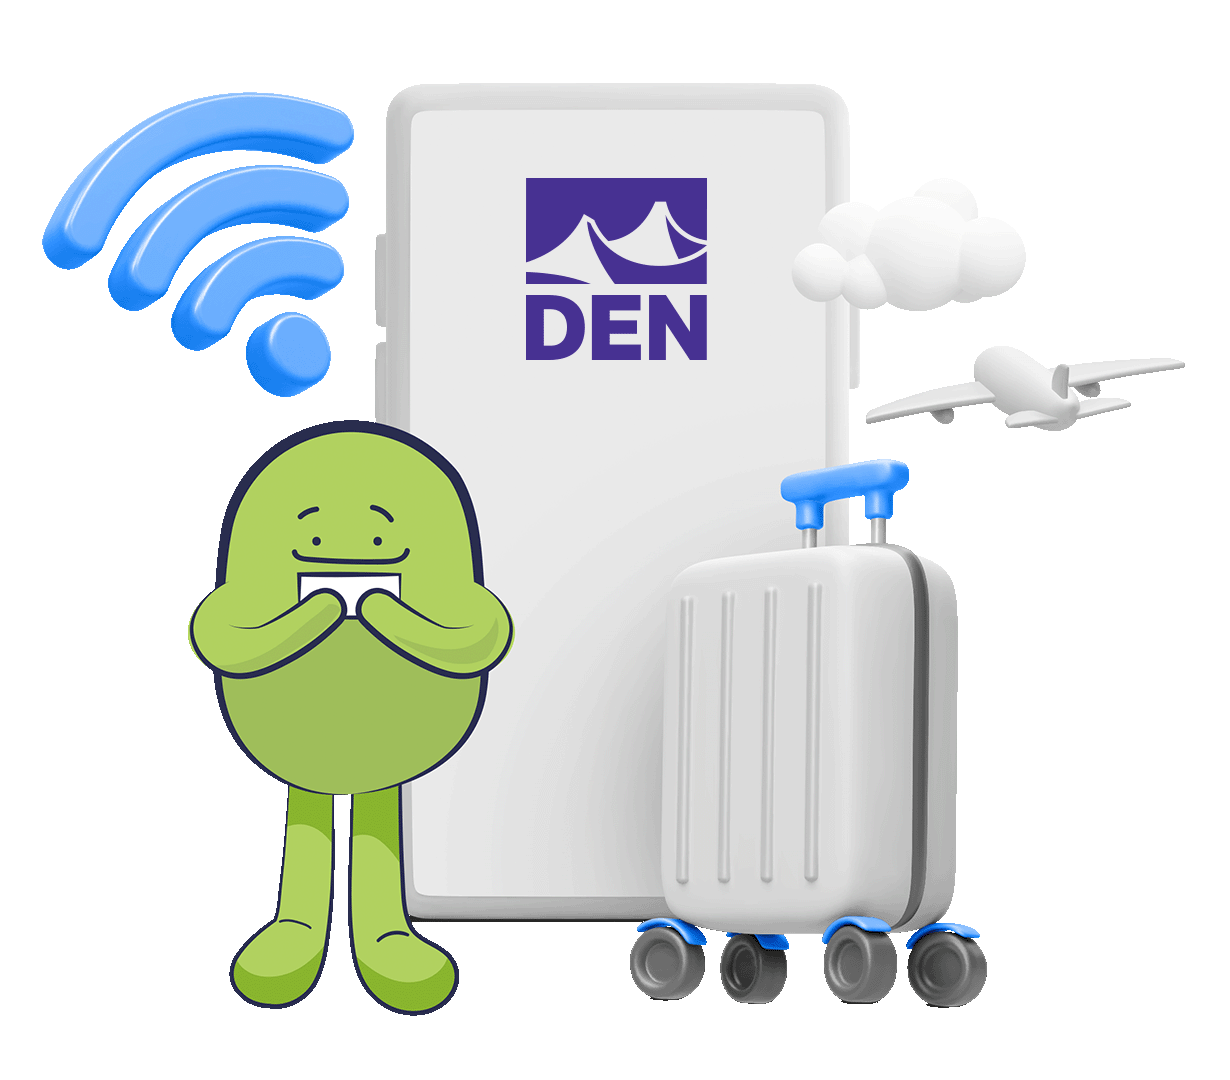 Connect to Denver Airport WiFi